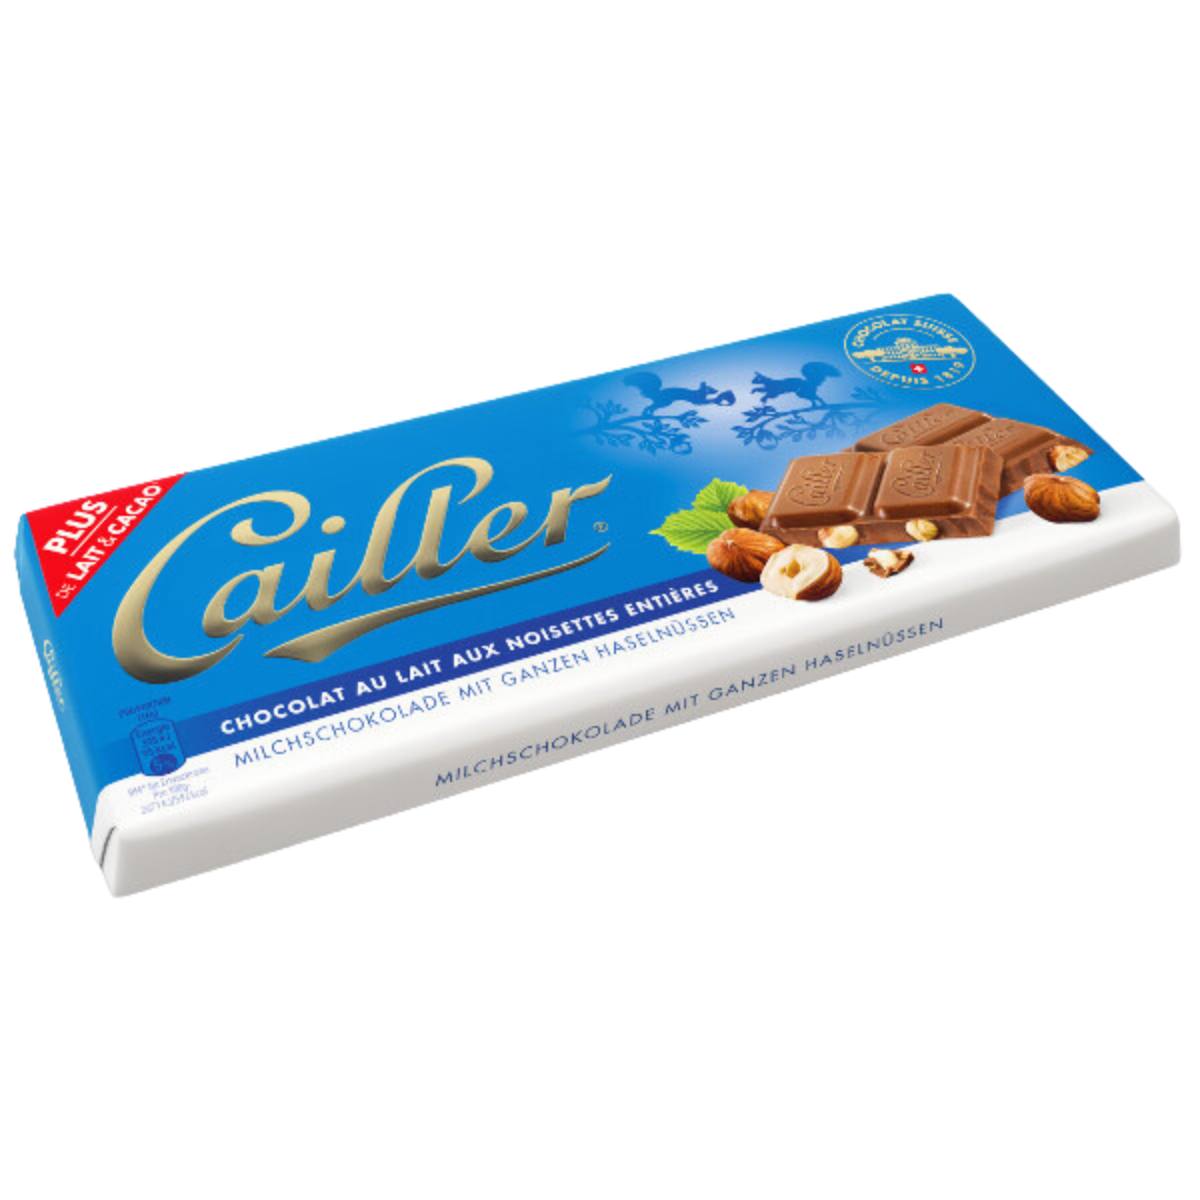 cailler milch haselnuss 100g v1